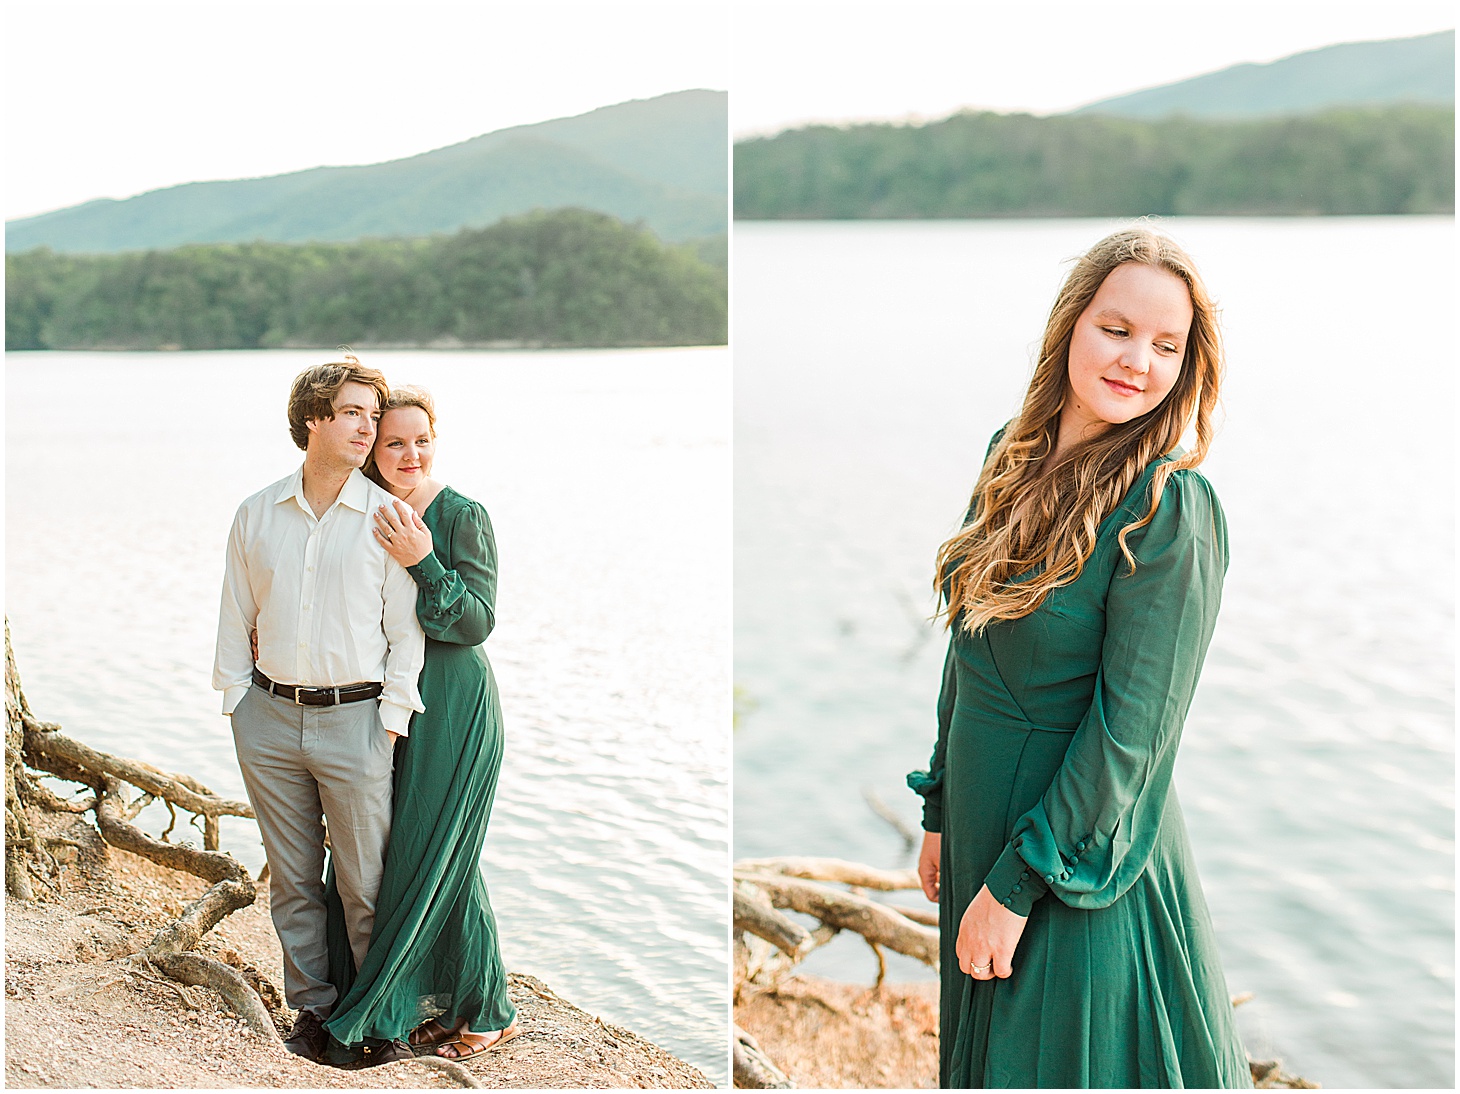 carvinscoveengagementsession_roanokeengagementsession_carvinscove_virginiawedding_virginiaweddingphotographer_vaweddingphotographer_photo_0052.jpg